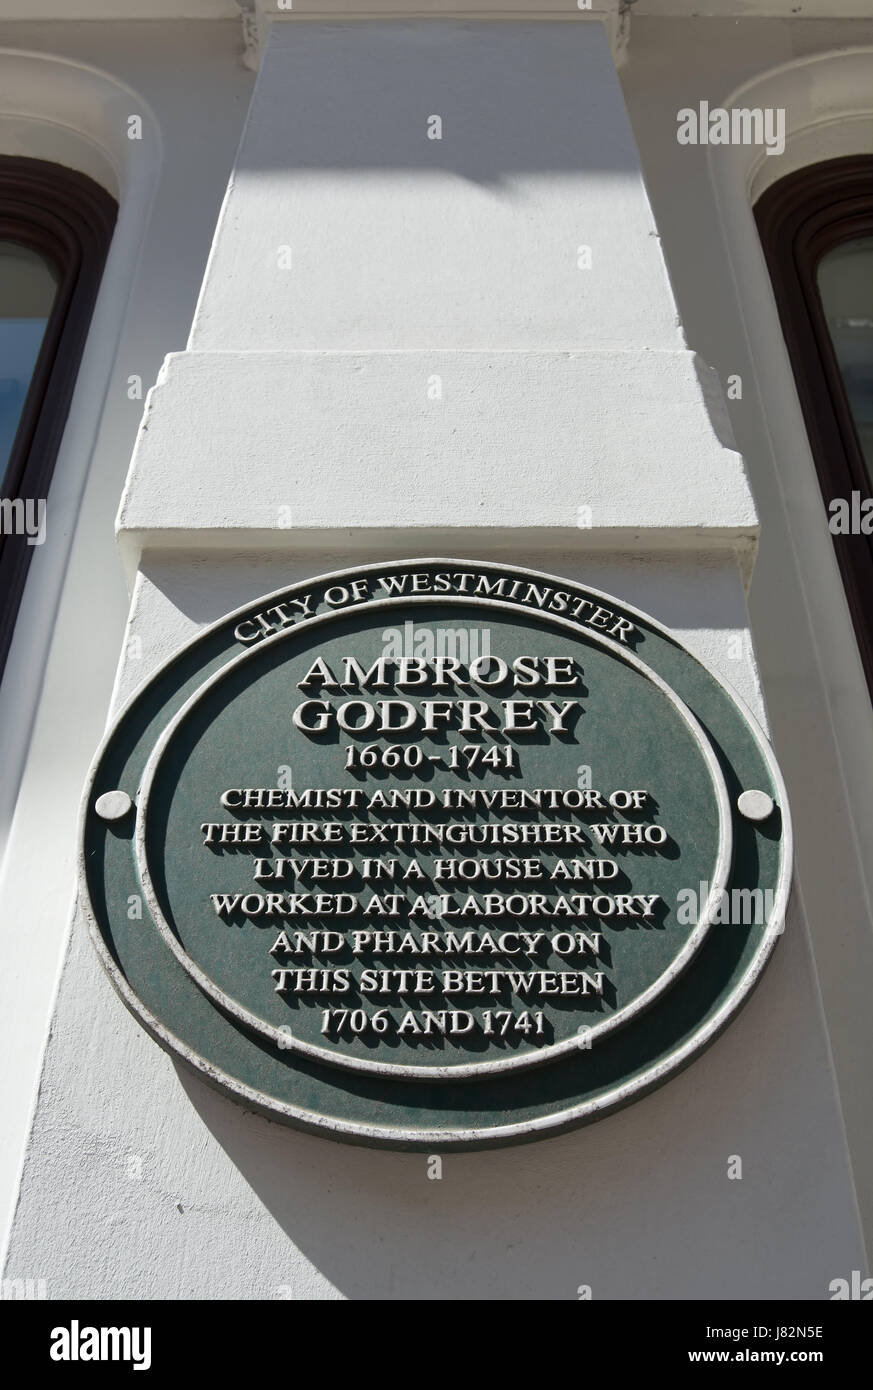 city of westminster green plaque marking a home and workplace of chemist and inventor ambrose godfrey, covent garden, london, england Stock Photo